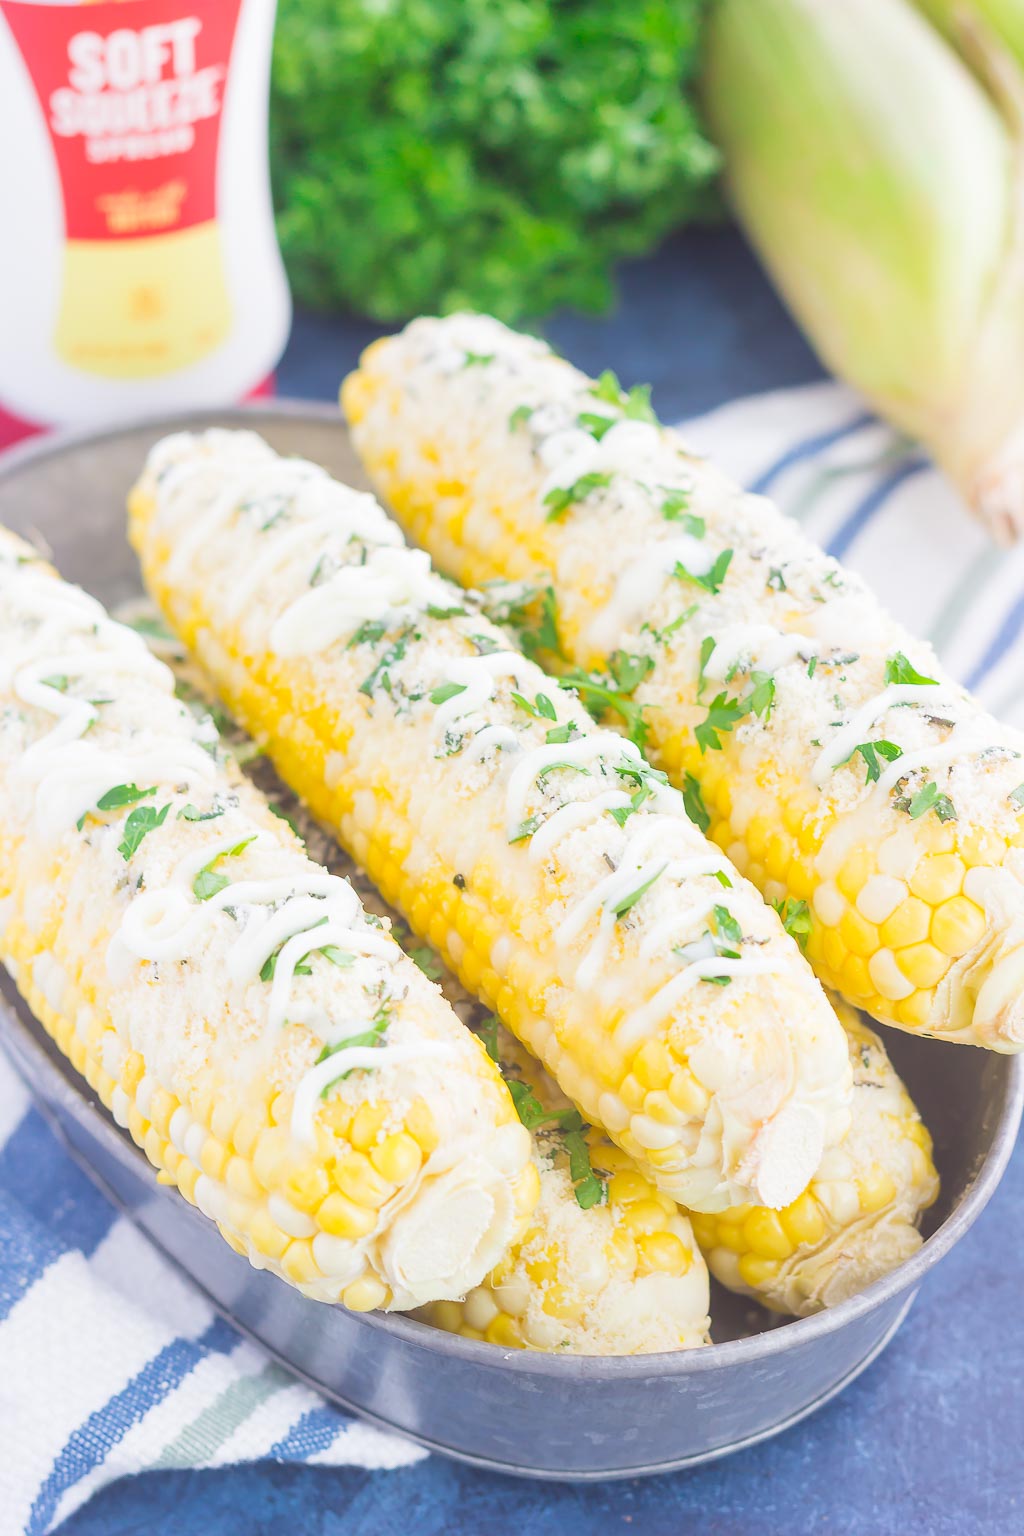 Parmesan Herb Corn on the Cob in a silver tray